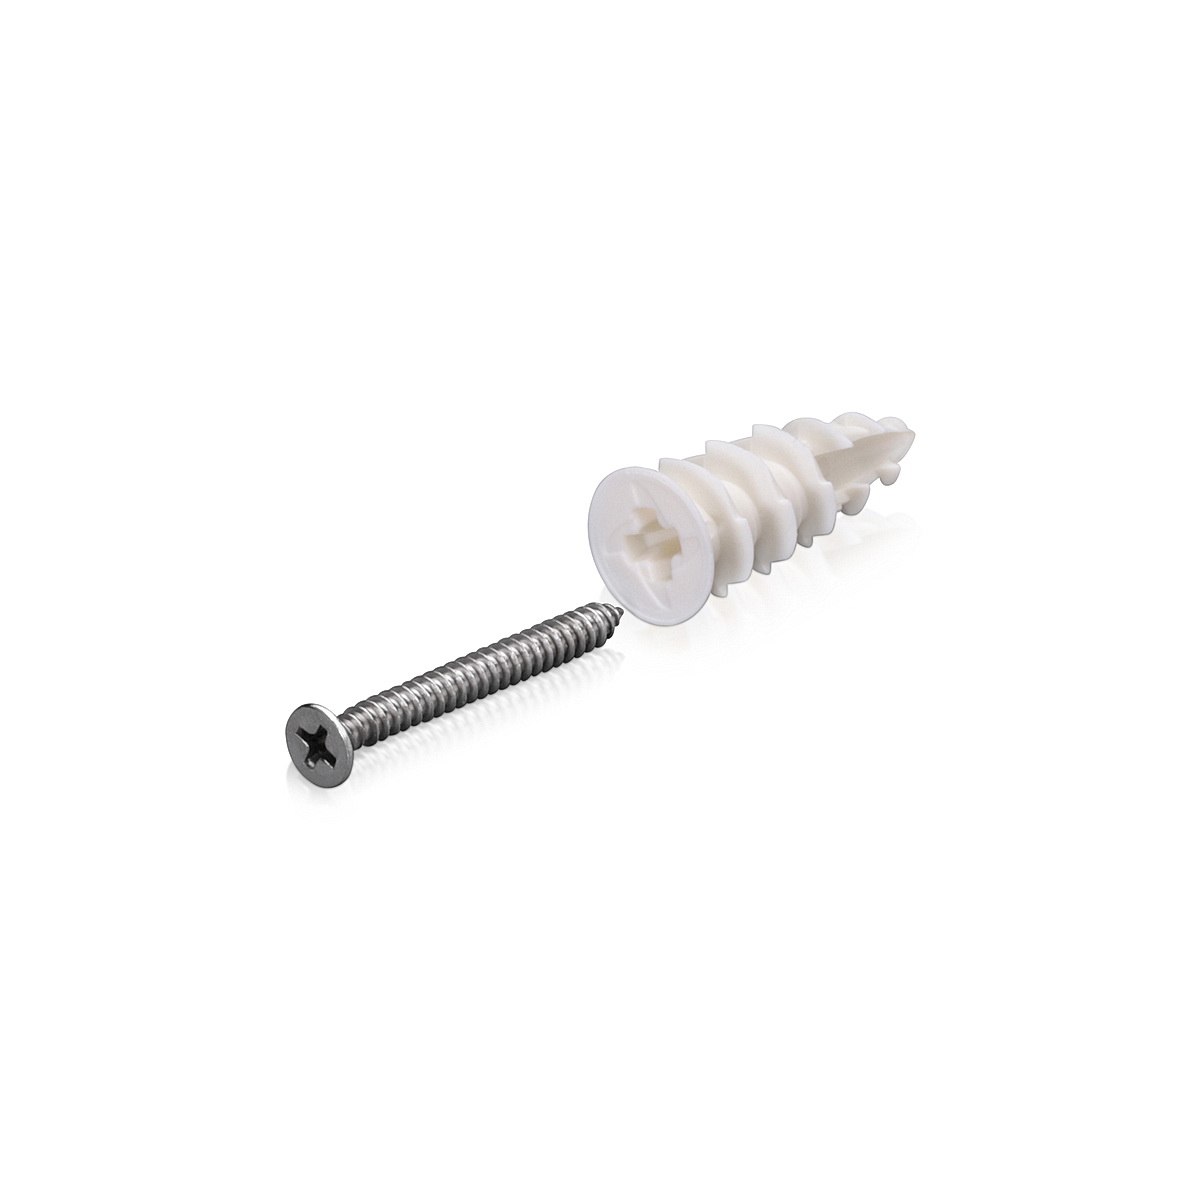 #8 Stainless Steel Screw and Nylon Anchor Package for Drywall